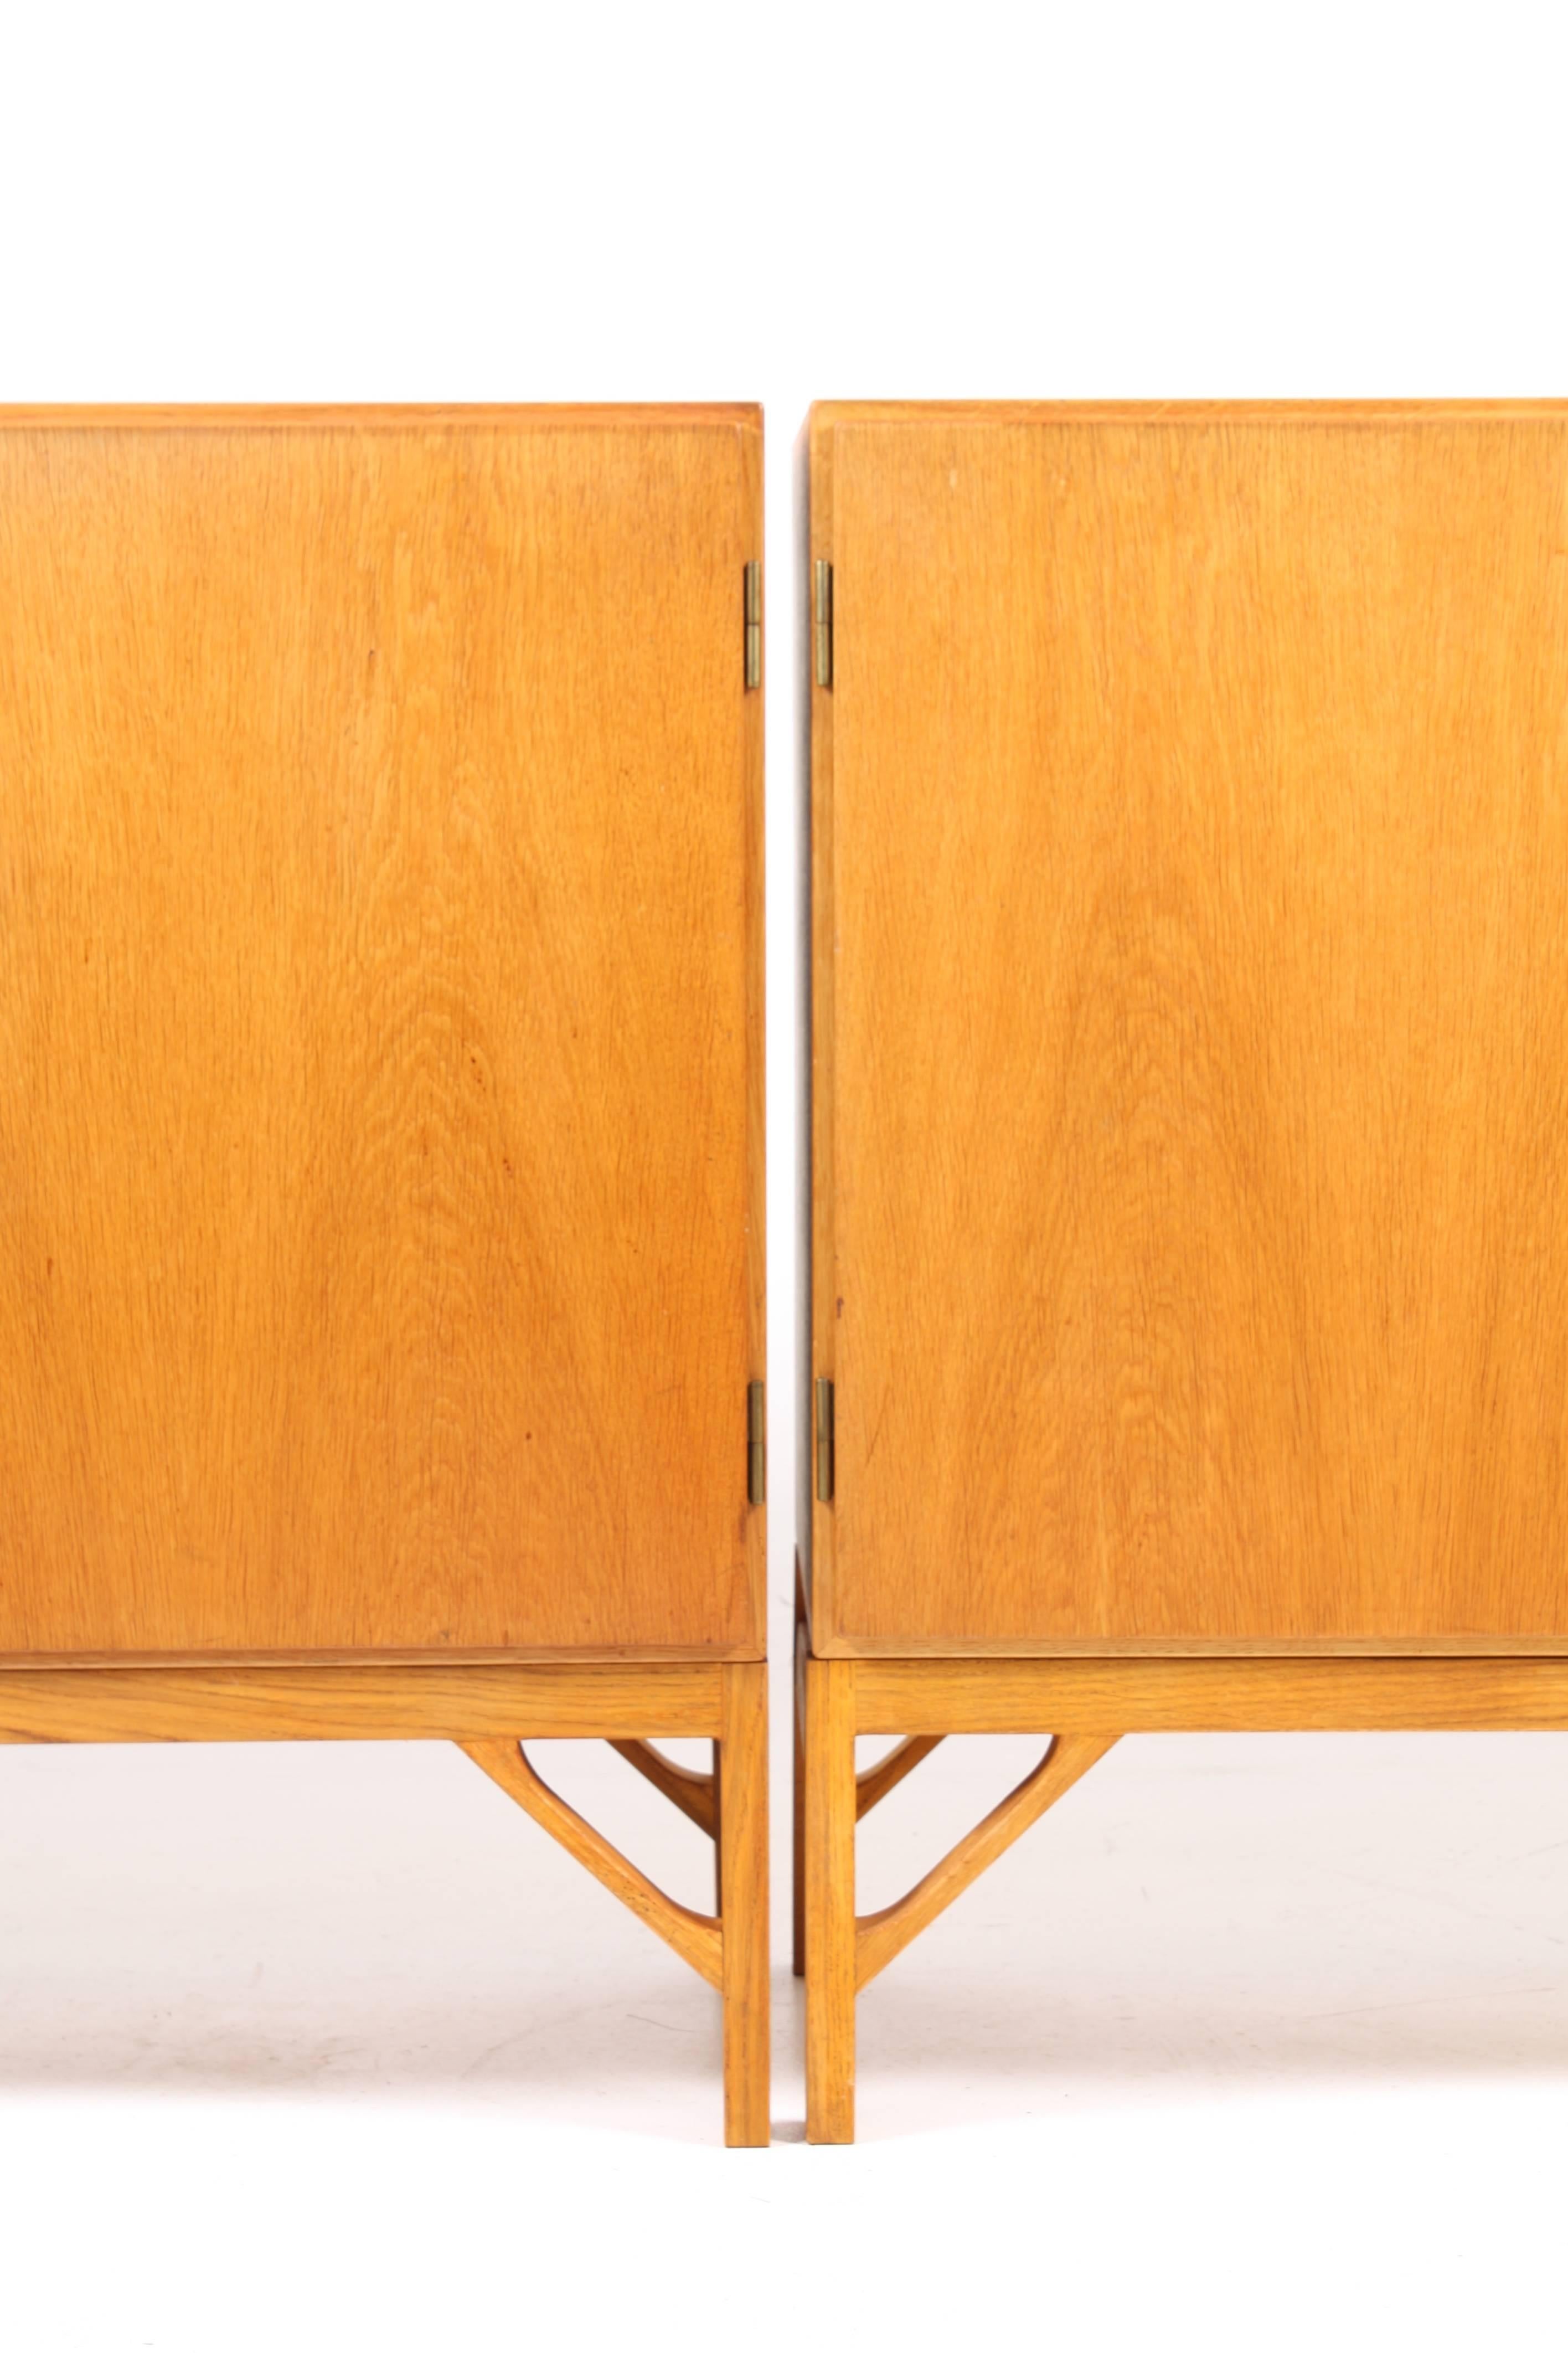 Pair of Pristine China, cabins in wax finished Scandinavian oak. Stunning brass hardware and maple interior. Designed by MAA. Børge Mogensen in 1958, this piece is made by CM Madsen cabinetmakers Denmark, in the 1960s. Great original condition.
 